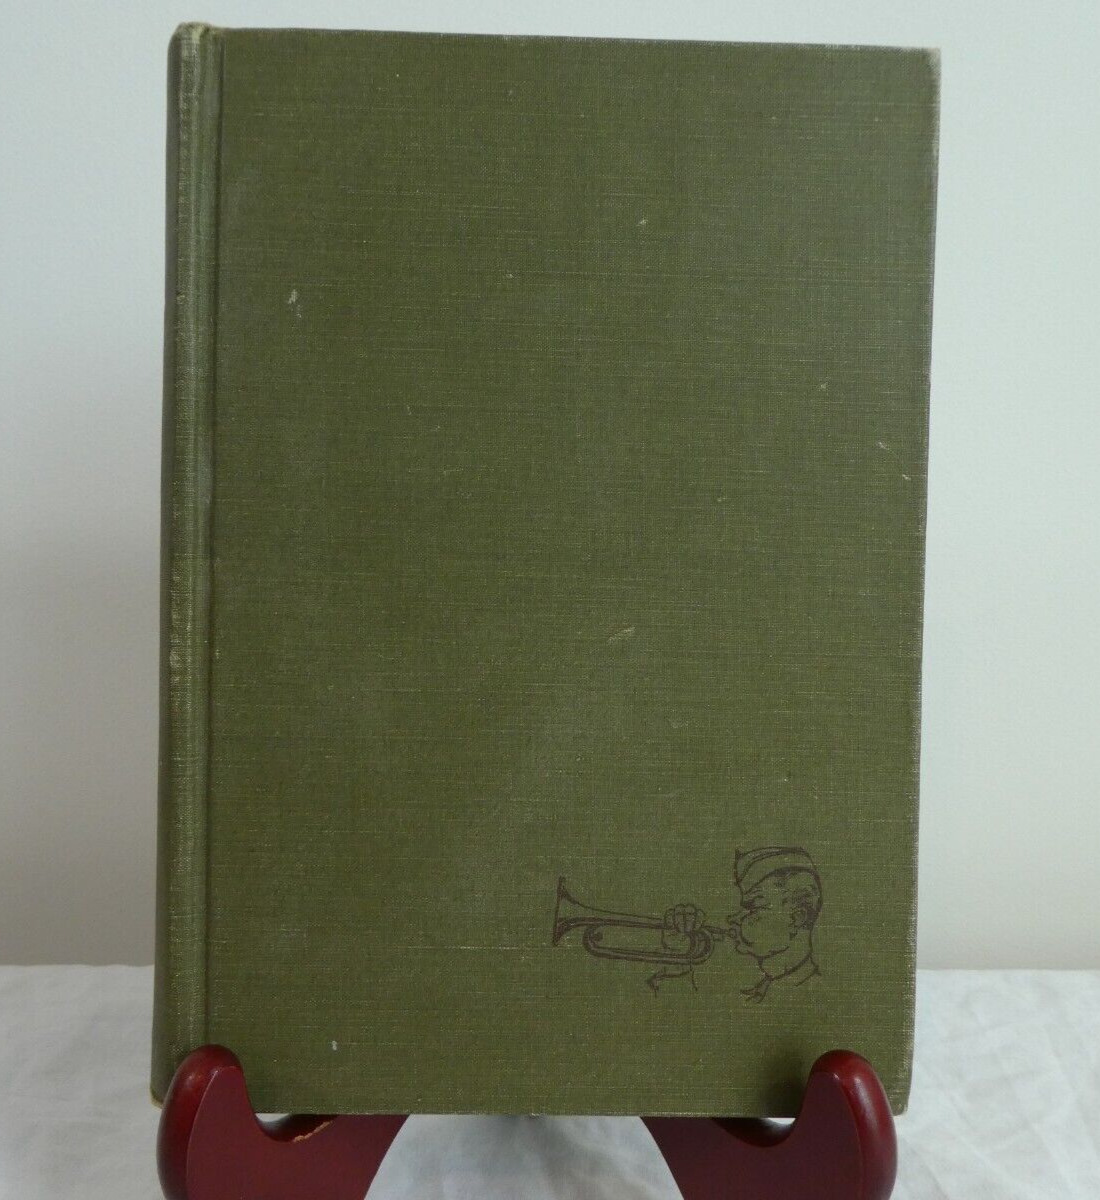 Vtg 1942 WW2 Pack Up Your Troubles Hardcover Book Whittlesey House By Ted Malone